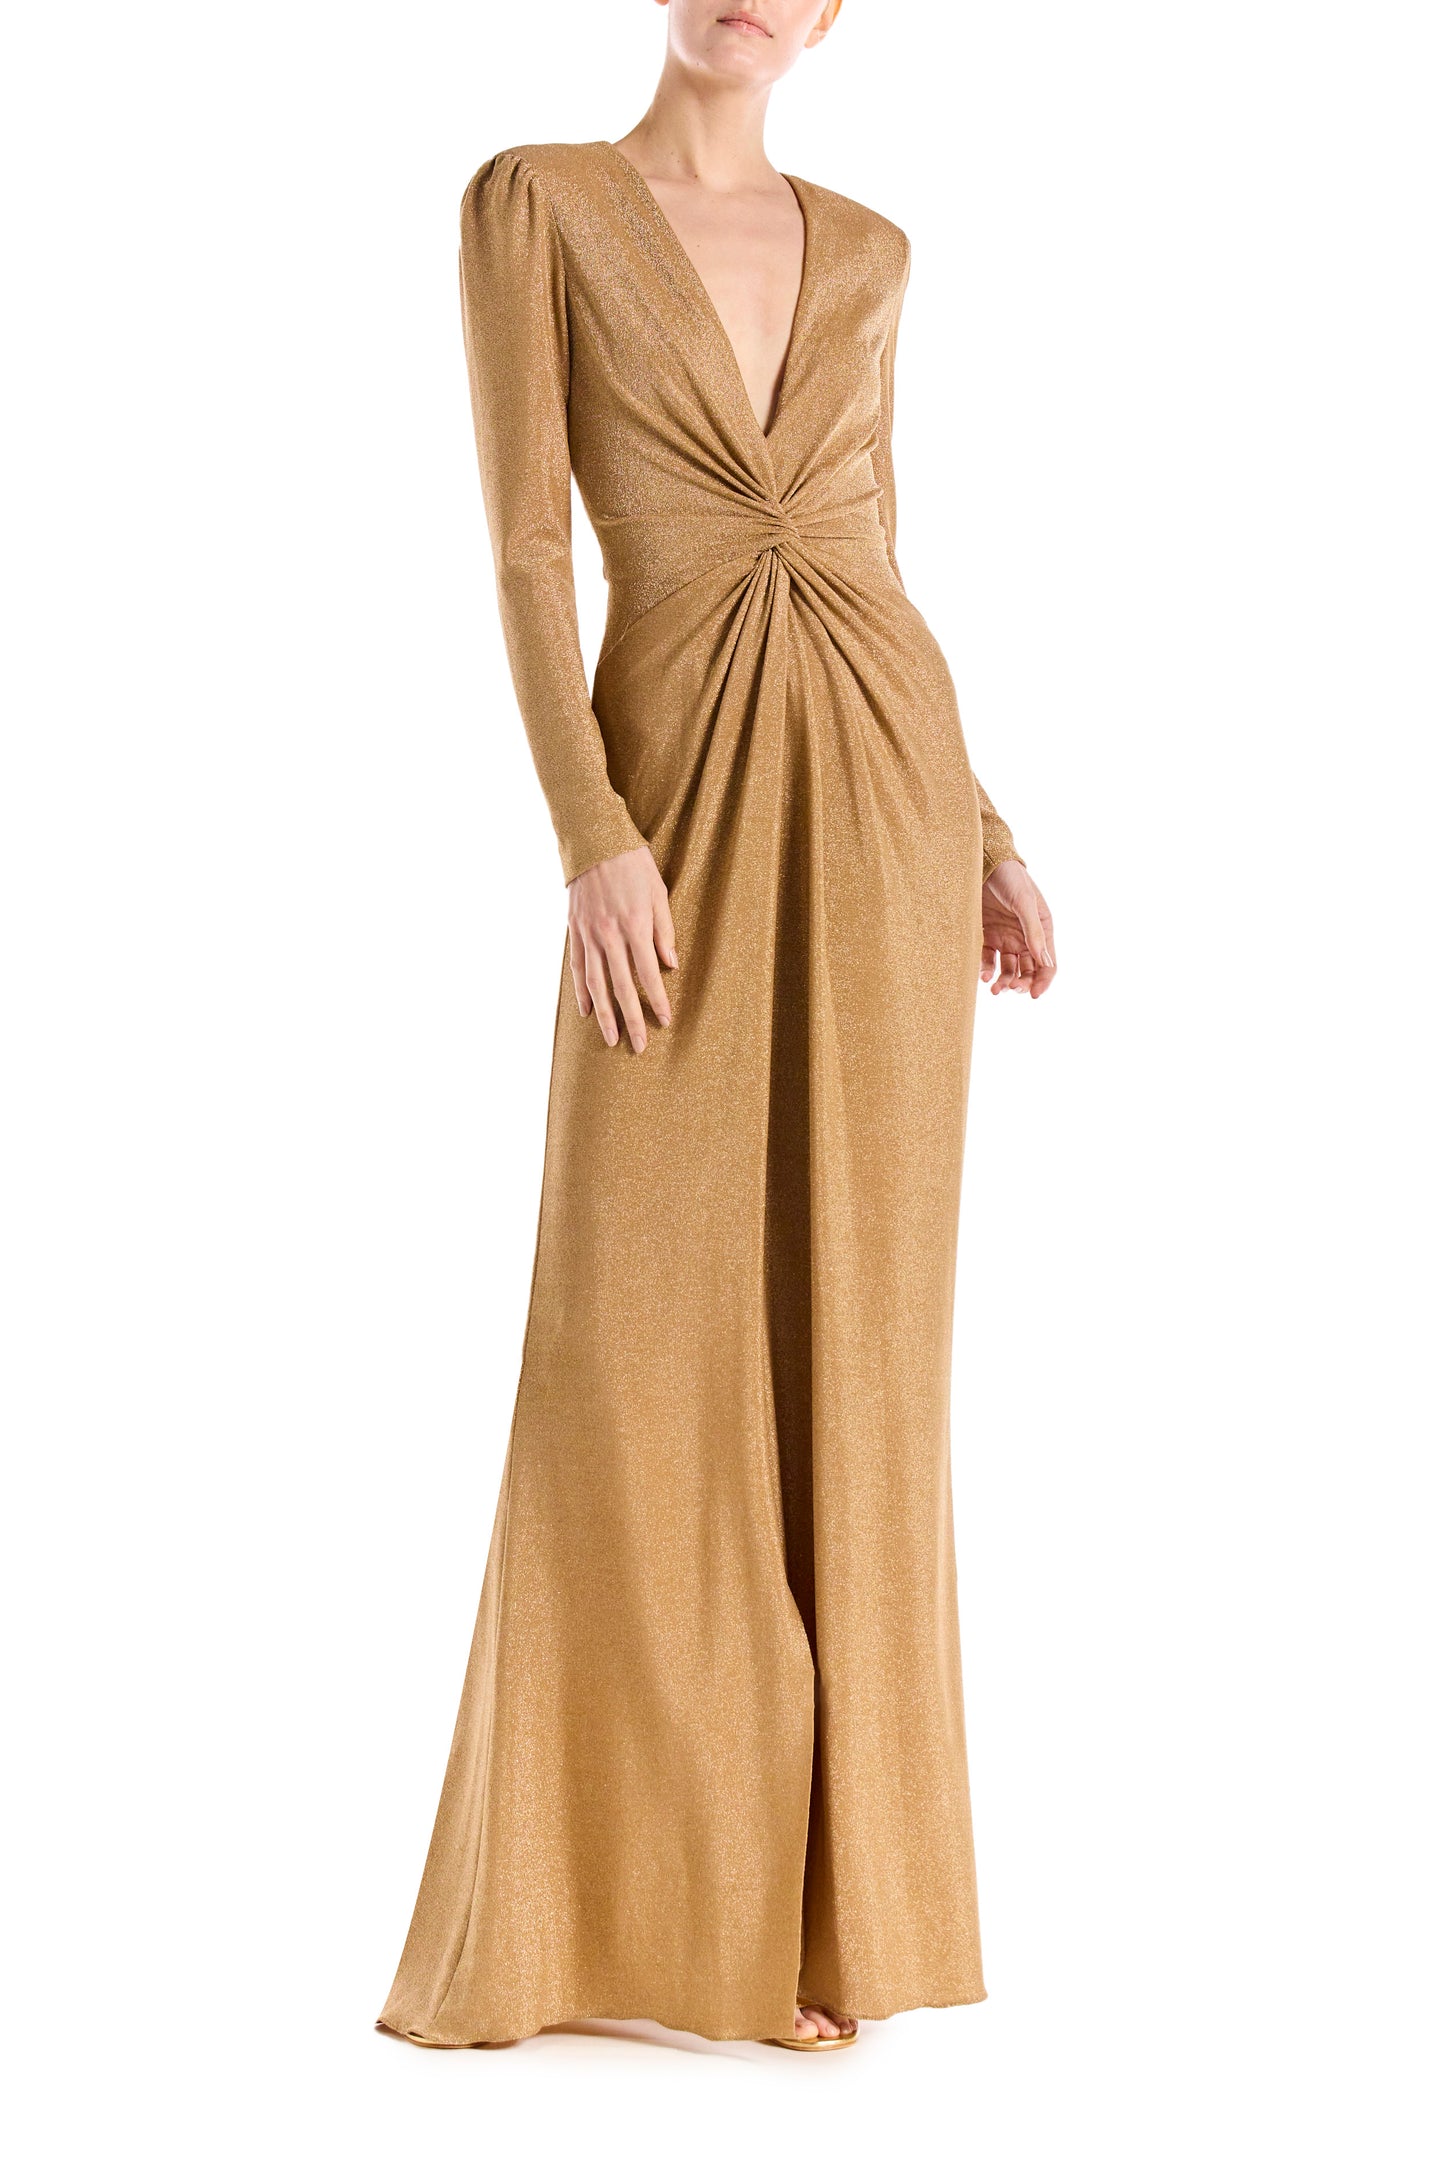 Antique Gold glitter knit dress with long sleeves and deep vneck.